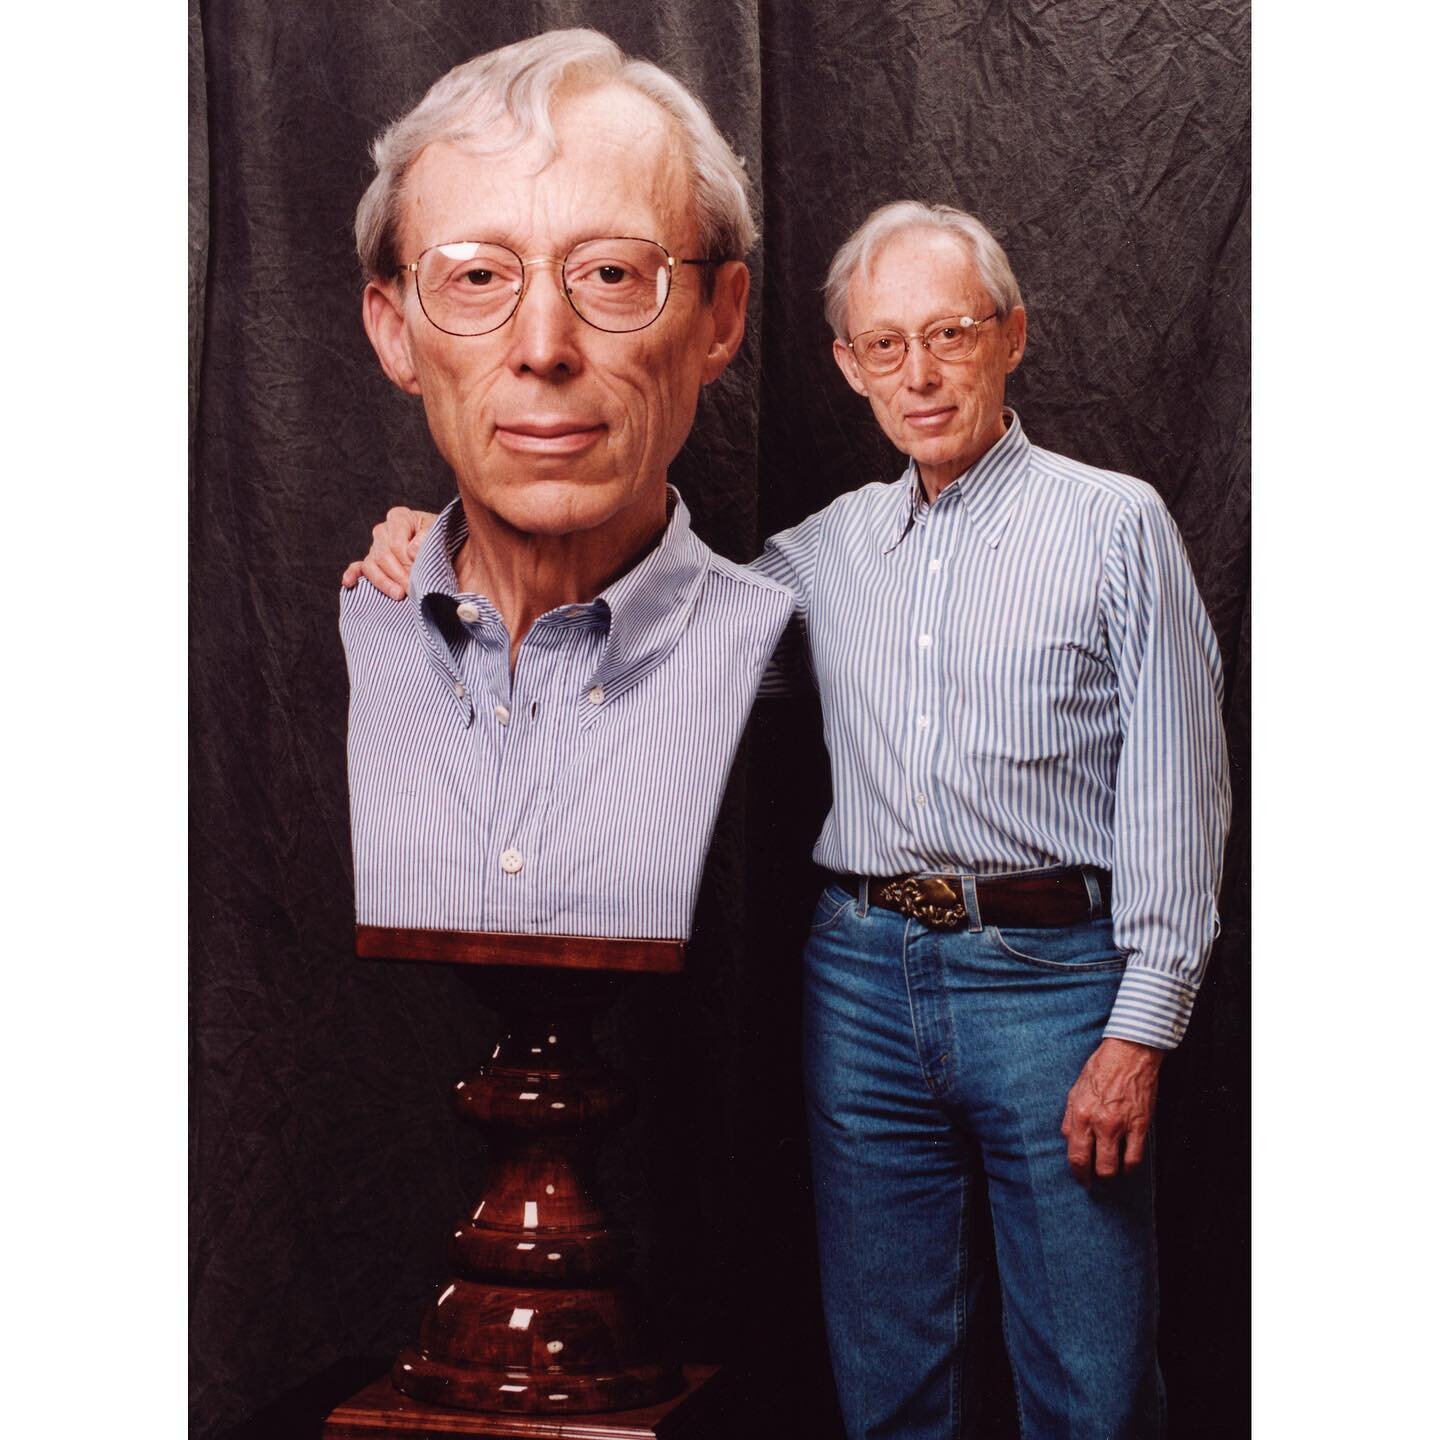 Happy 100th Birthday Dick Smith!! June 26th 1922.  He was one of the biggest inspirations to start my career 35 years ago.  I made this portrait of him for his 80th birthday.  I cannot believe it was 20 years ago.  Group photo was from 1988 he invite